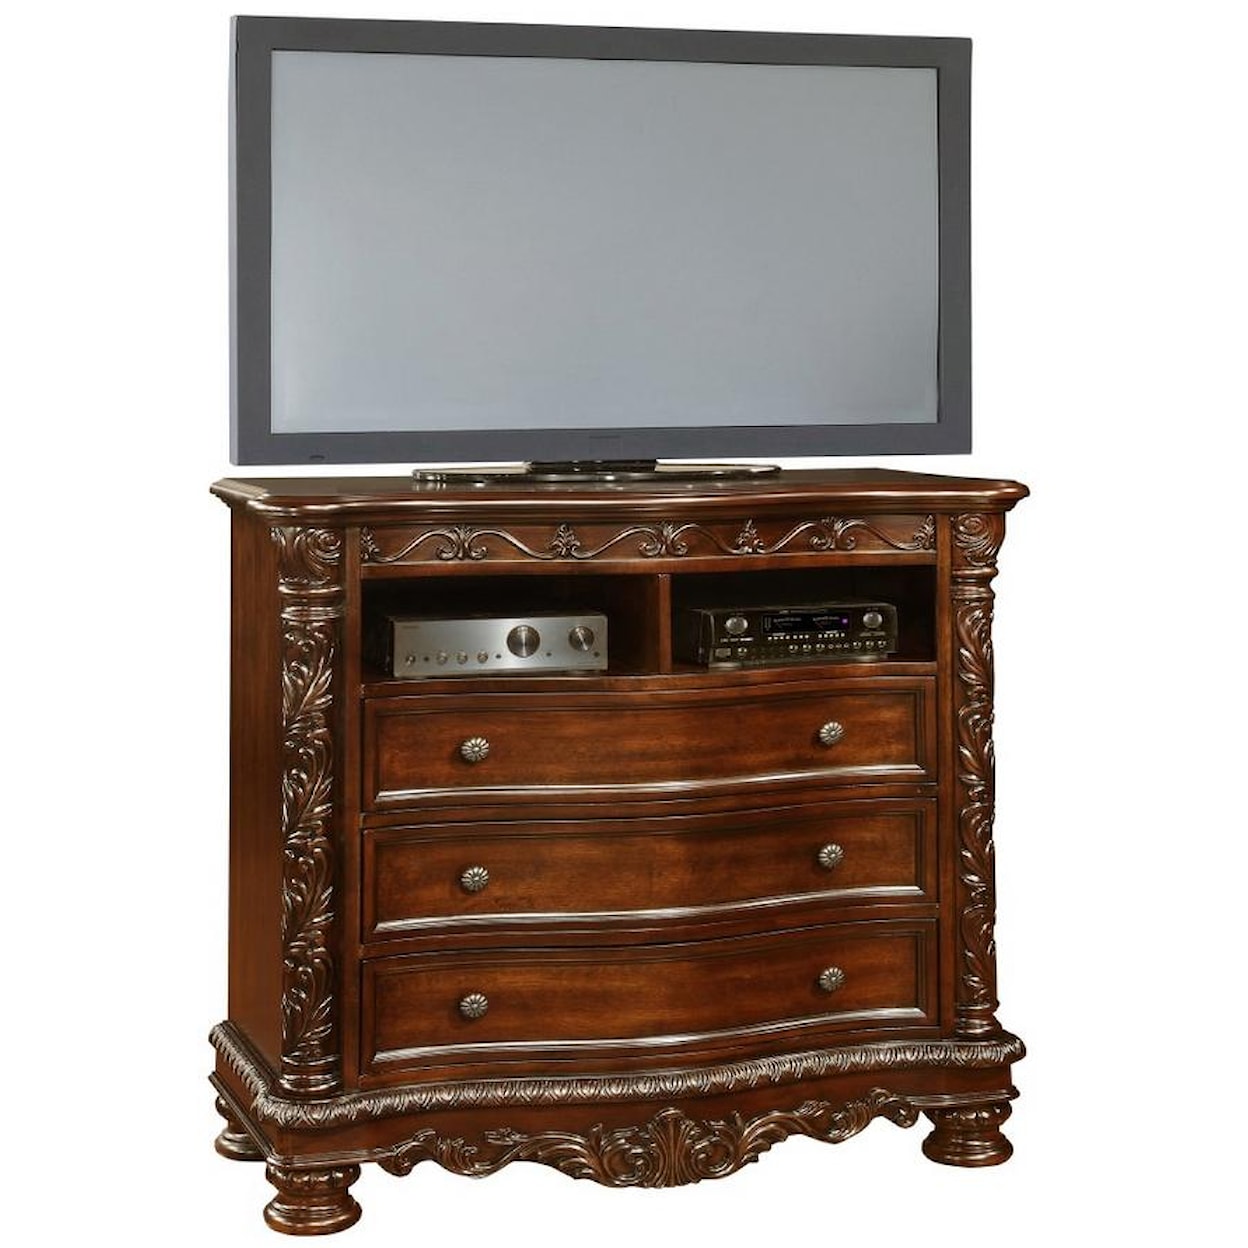 Fairfax Home Furnishings Patterson Media Chest